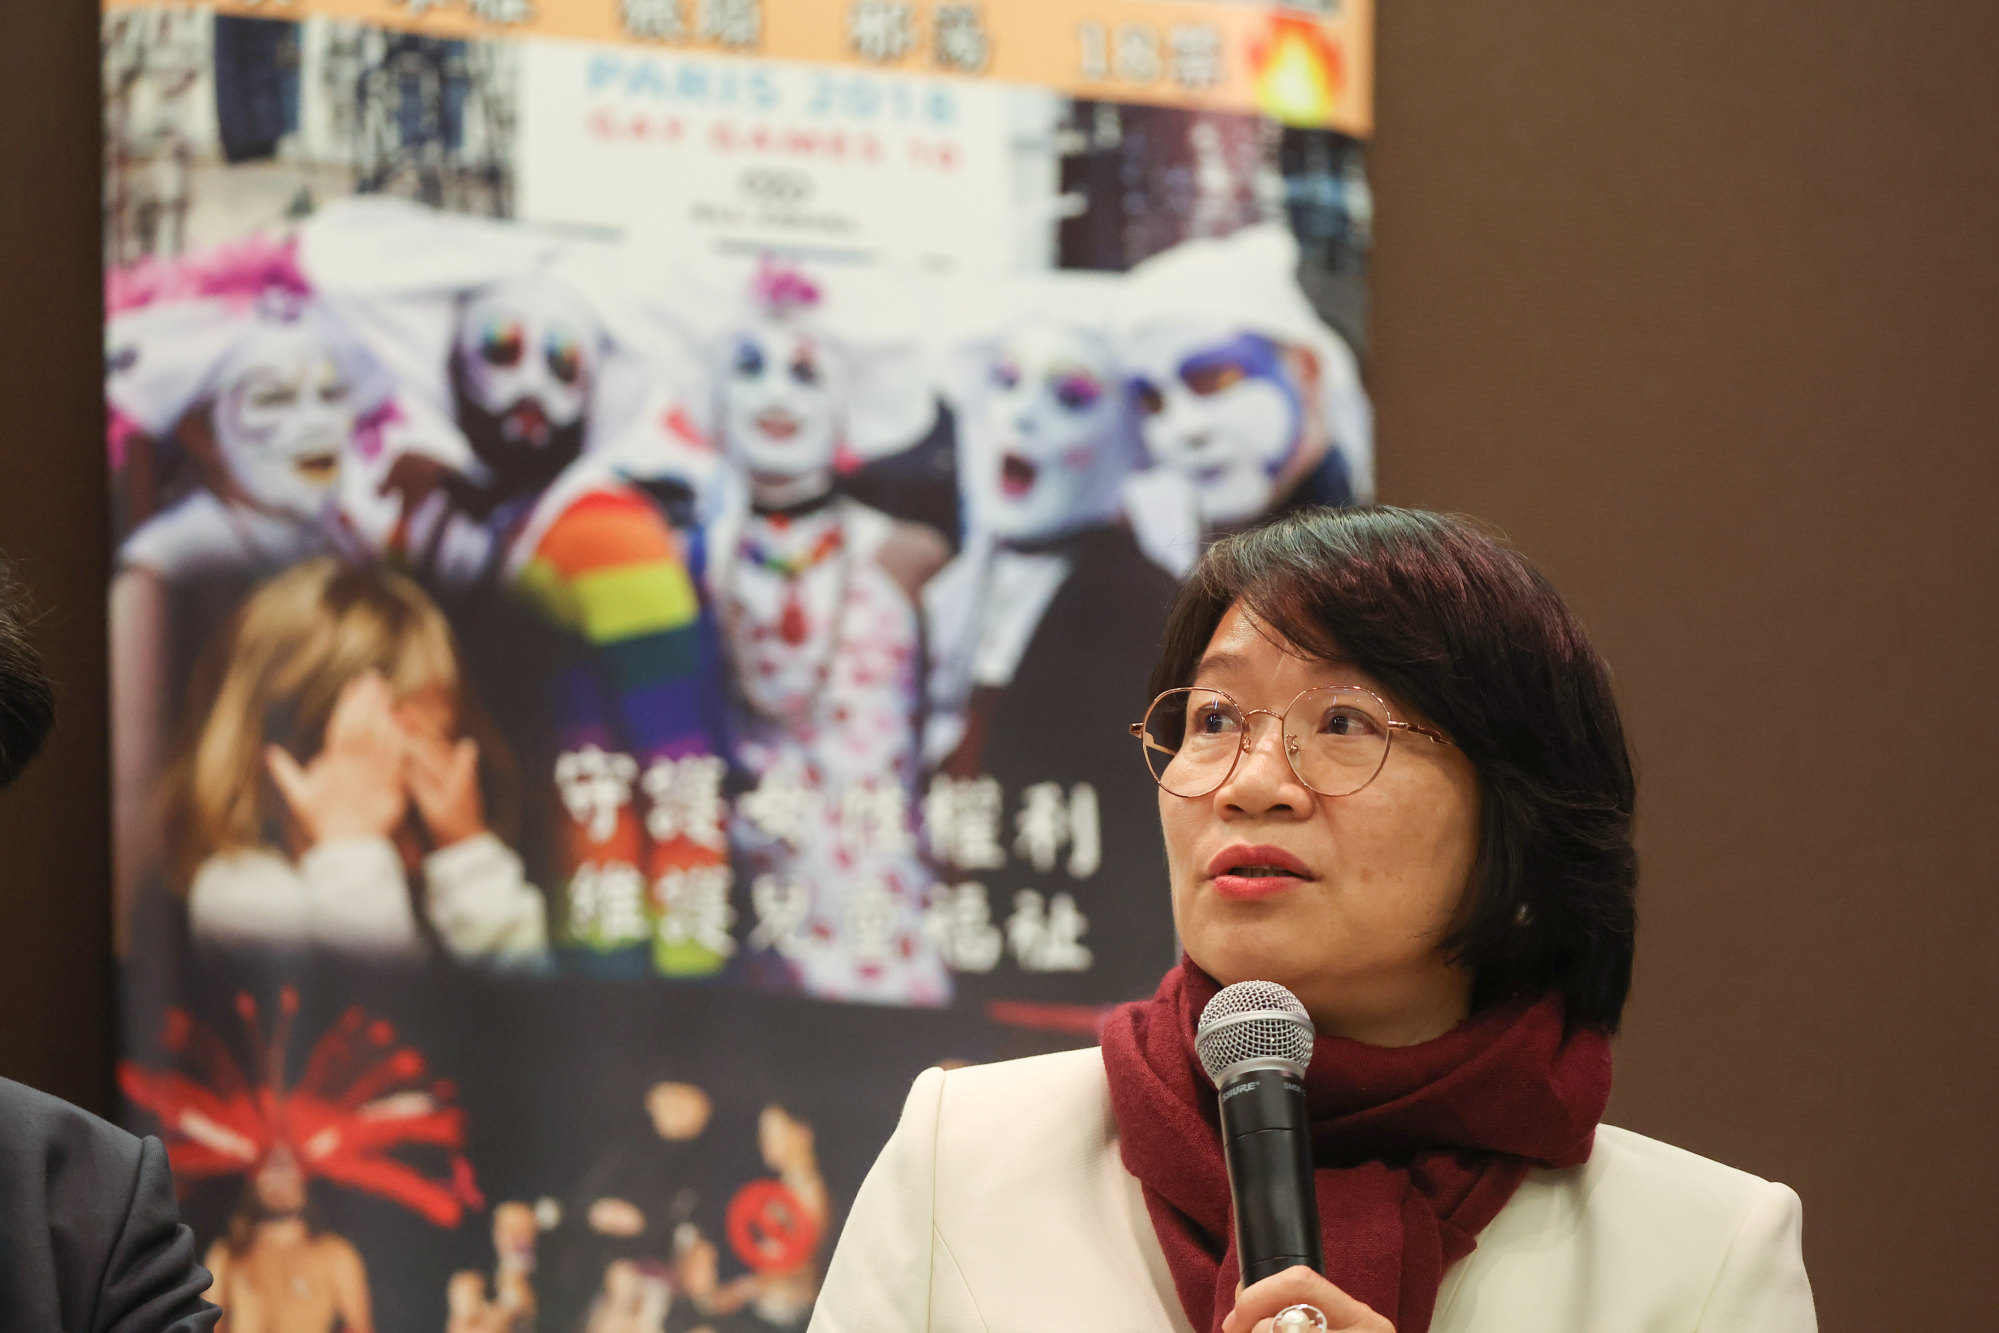 hong kong hosting gay games shows openness, mainland chinese professor says, but fellow basic law committee member urges city to uphold traditional values